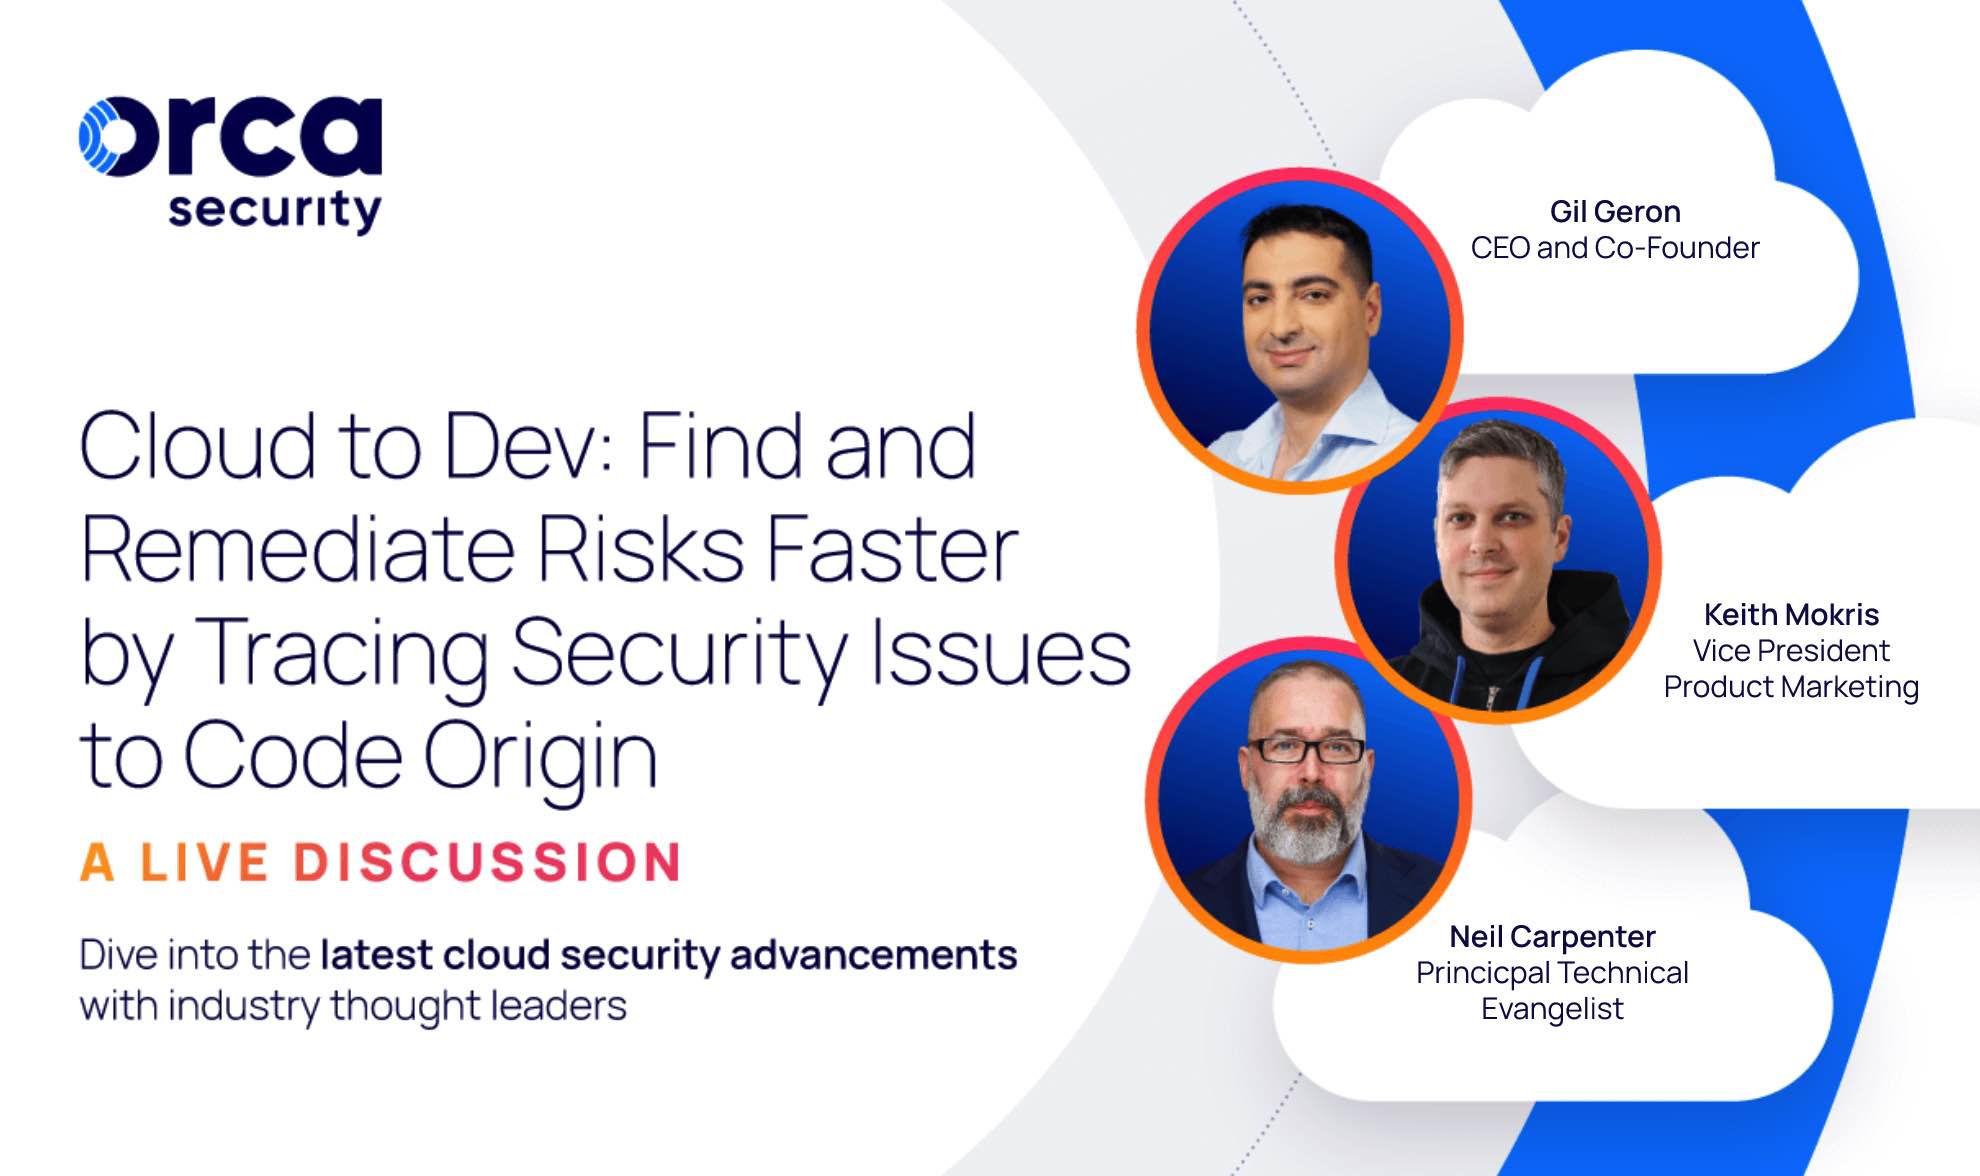 Find and Remediate Risks Faster by Tracing Security Issues to Code Origin